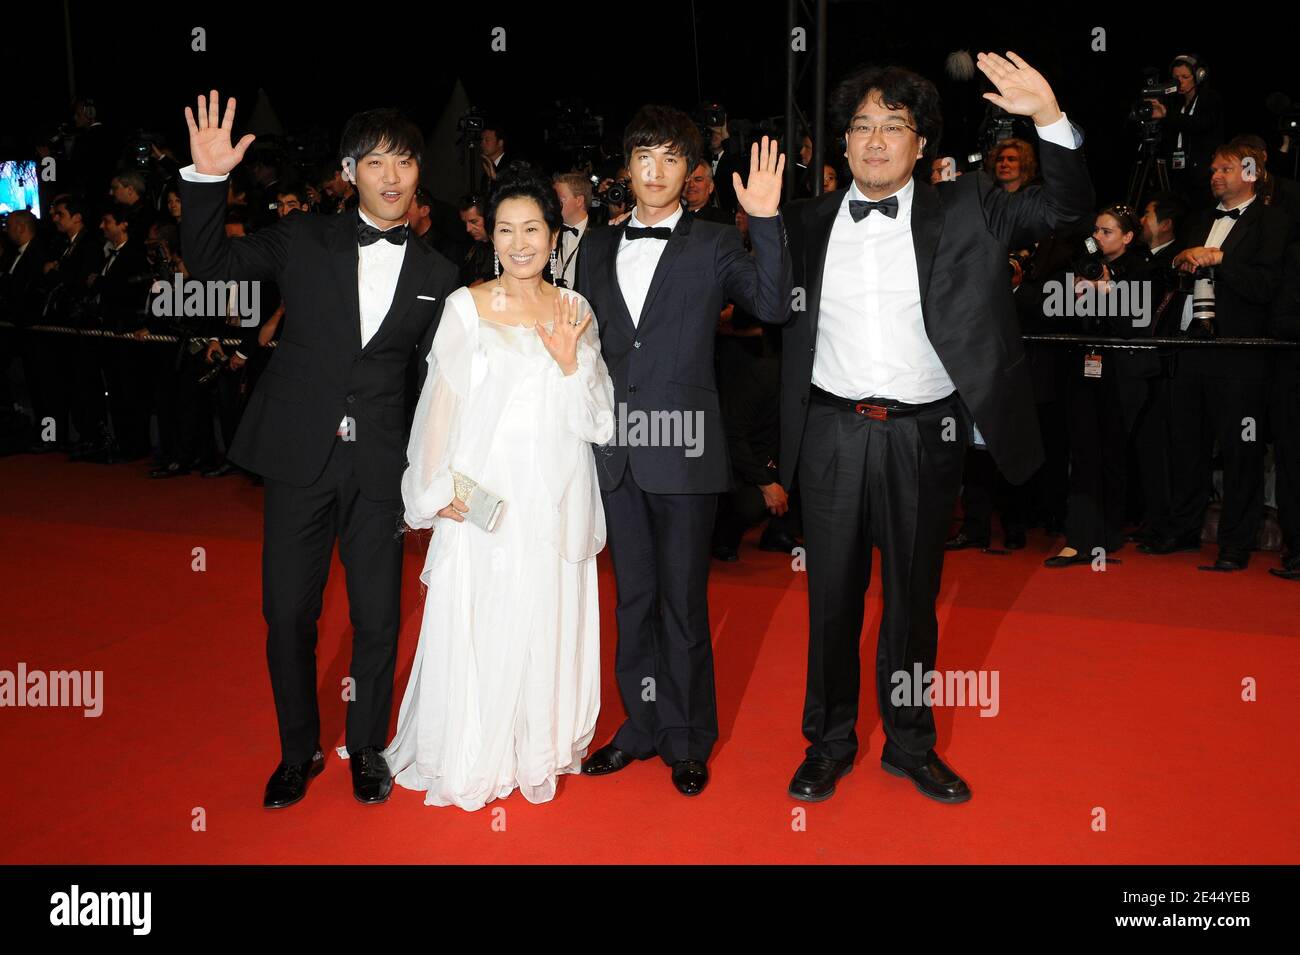 Actor Jin Goo and Actress Kim Hye-Ja with actor Won Bin and Director Bong Joon Ho arriving to the screening of 'Taking Woodstock' during the 62nd Cannes Film Festival at the Palais des Festivals in Cannes, France on May 16, 2009. Photo by Nebinger-Orban/ABACAPRESS.COM Stock Photo